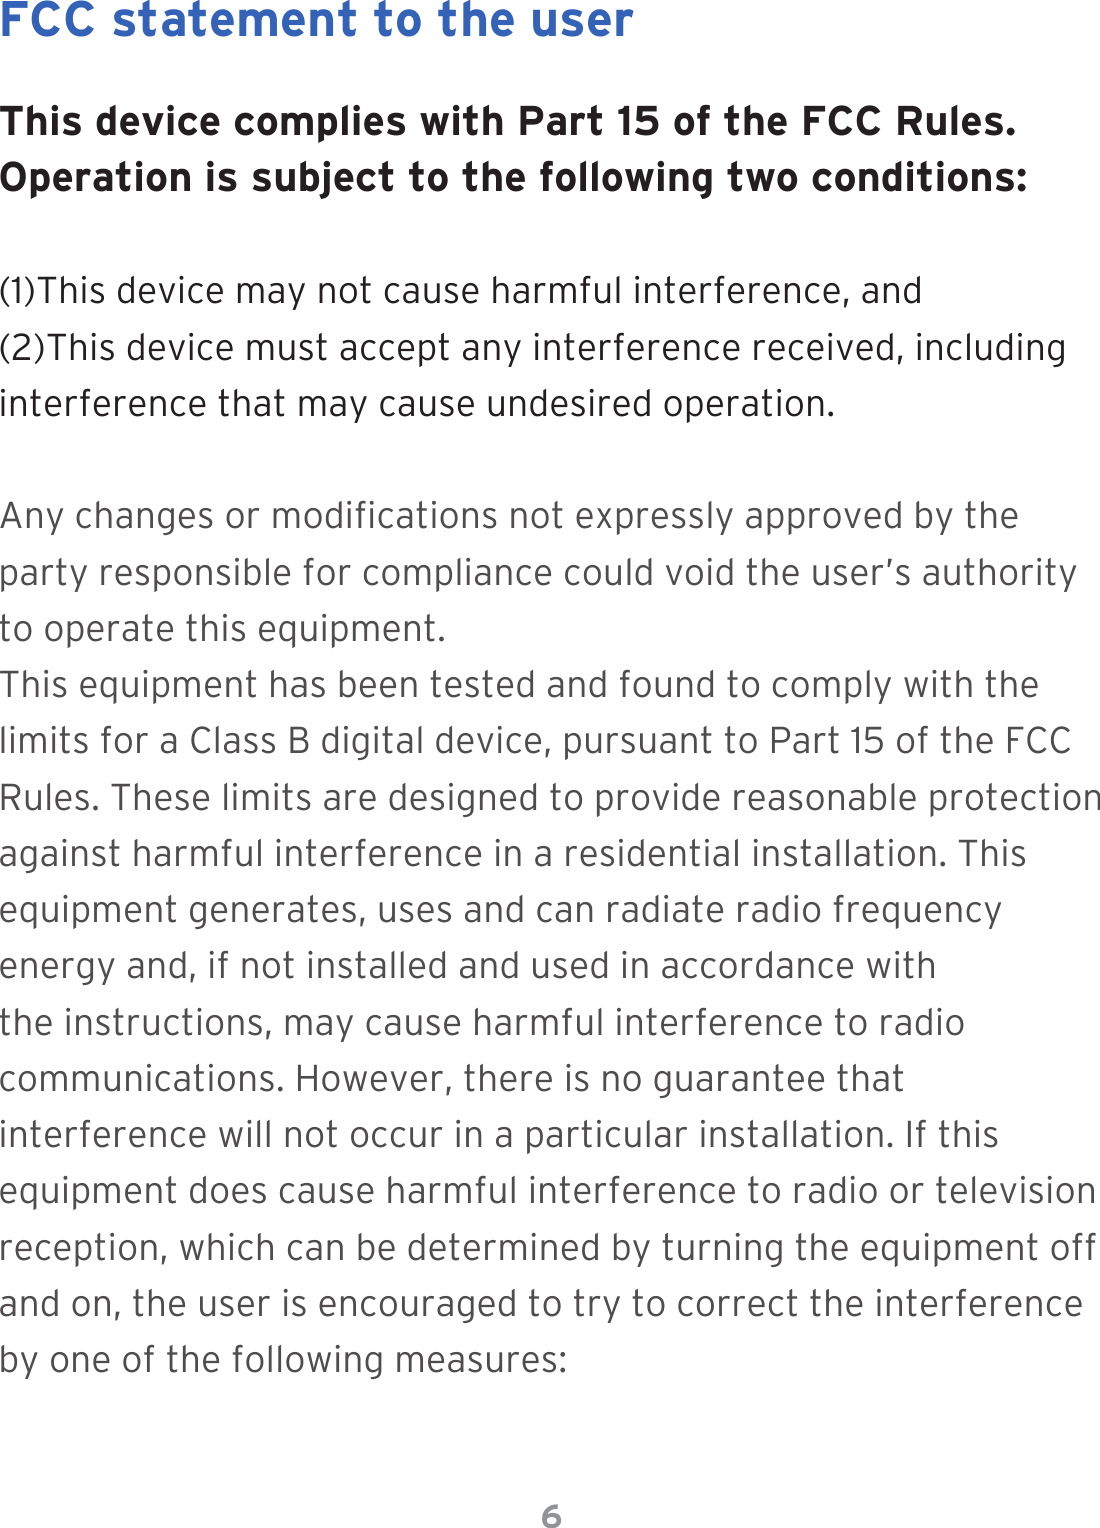 6This device complies with Part 15 of the FCC Rules. Operation is subject to the following two conditions: (1)This device may not cause harmful interference, and (2)This  device  must  accept  any  interference  received,  including         interference that may cause undesired operation.Any changes or modications not expressly approved by the party responsible for compliance could void the user’s authority to operate this equipment.This equipment has been tested and found to comply with the limits for a Class B digital device, pursuant to Part 15 of the FCC Rules. These limits are designed to provide reasonable protection against harmful interference in a residential installation. This equipment generates, uses and can radiate radio frequency energy and, if not installed and used in accordance with the instructions, may cause harmful interference to radio communications. However, there is no guarantee that interference will not occur in a particular installation. If this equipment does cause harmful interference to radio or television reception, which can be determined by turning the equipment off and on, the user is encouraged to try to correct the interference by one of the following measures:FCC statement to the user